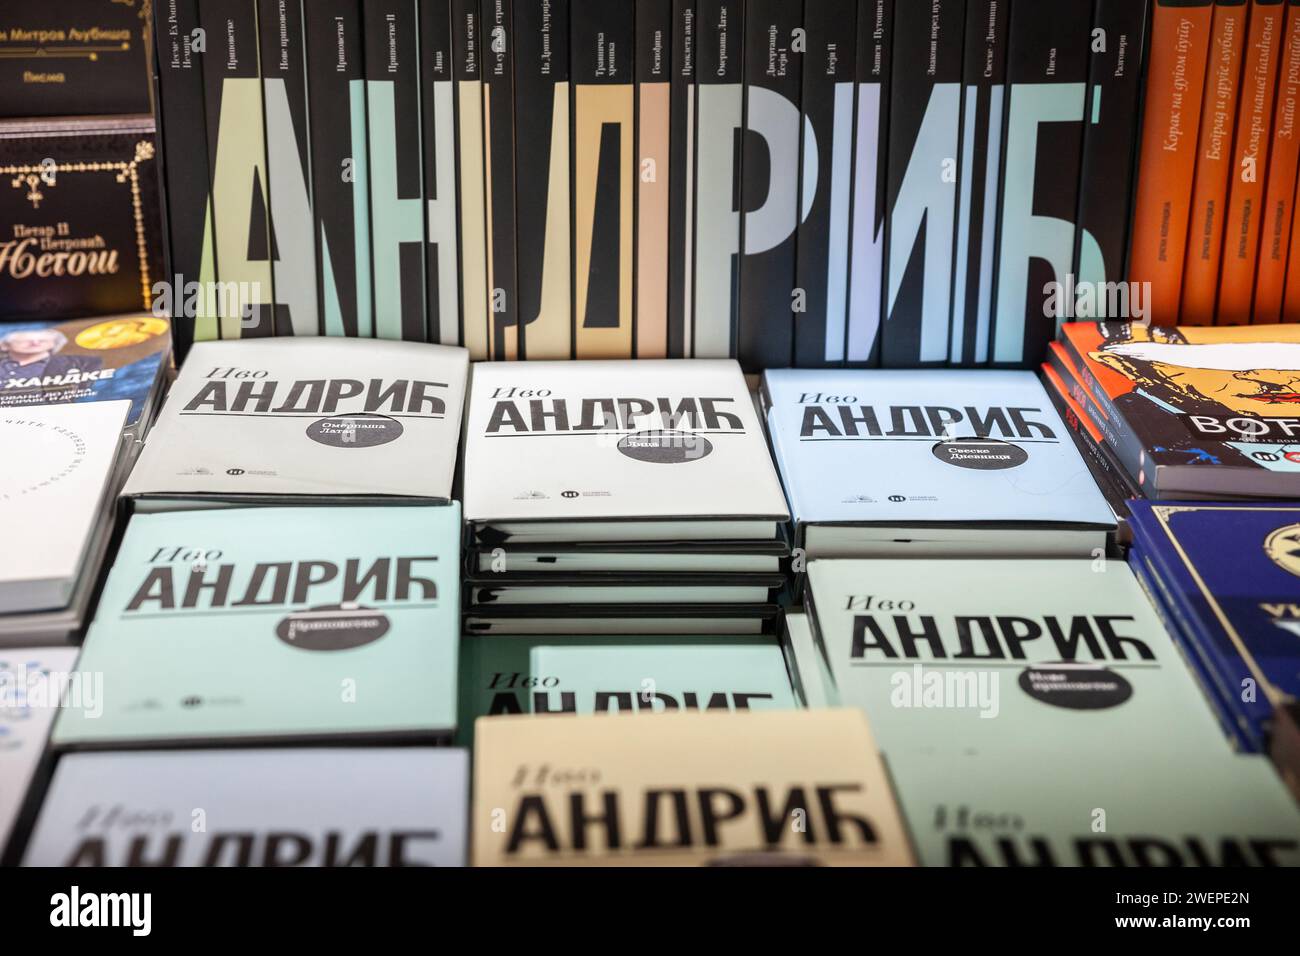 Picture of the book covers of ivo andric in a bookstore of Belgrade, Serbia. Ivo Andrić was a Yugoslav novelist, poet and short story writer who won t Stock Photo